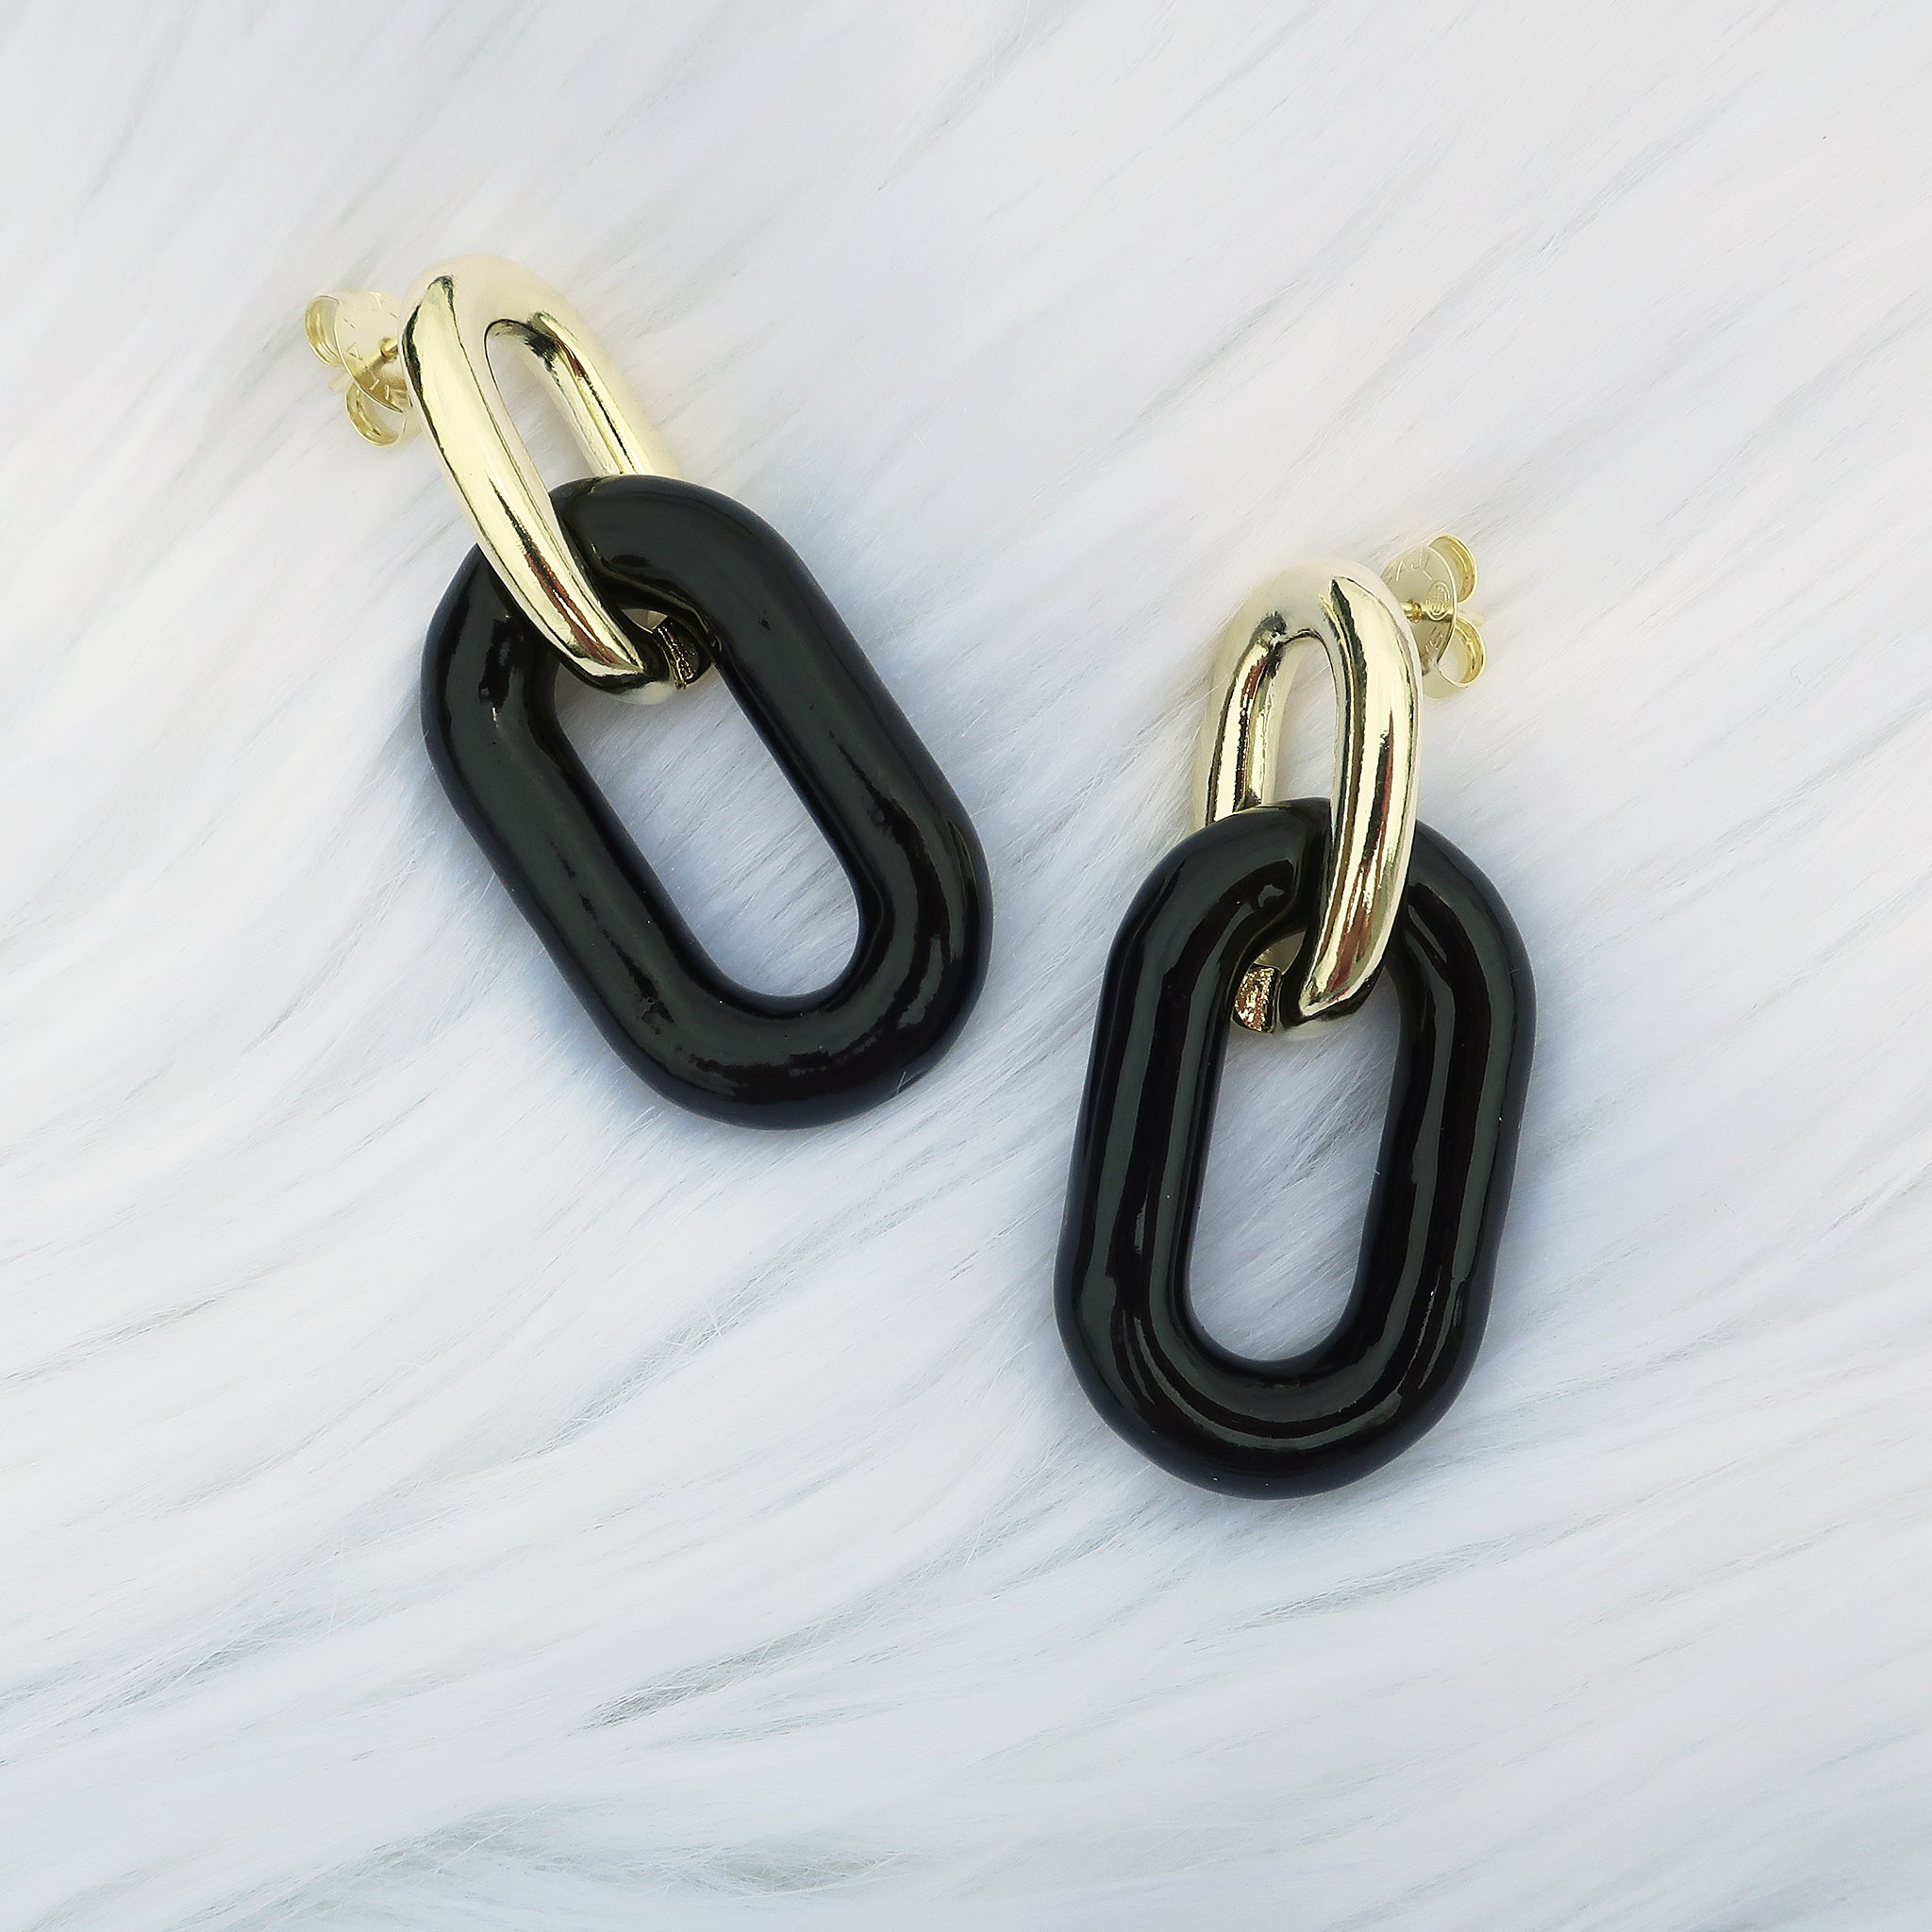 Sheila Fajl Small Shakedown Statement Earrings in Polished Gold and Black